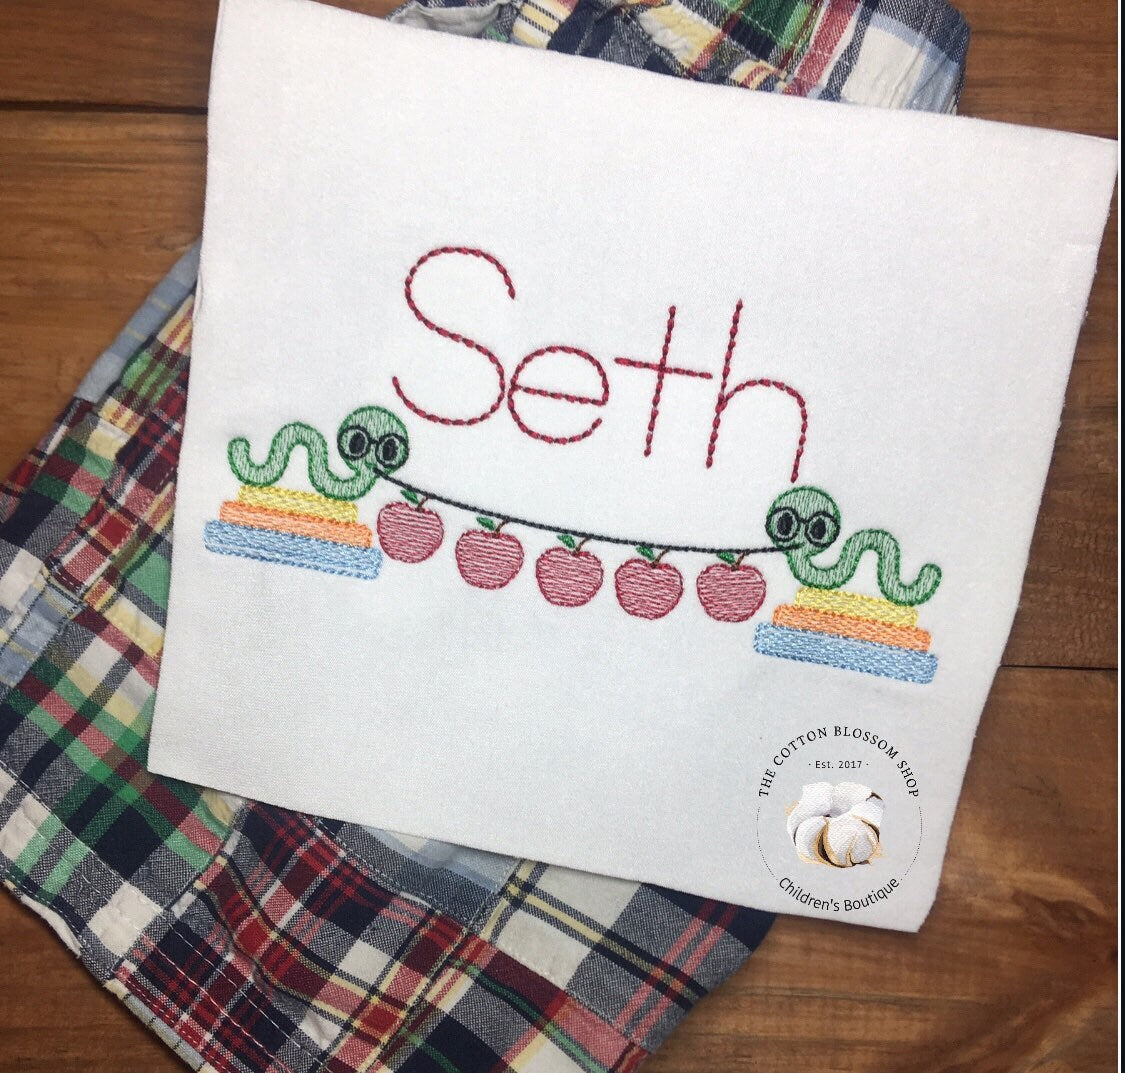 Boys back to school shirt, first day of school shirt, boys back to school shirt, boys gingham apple shirt, first day of kindergarten shirt